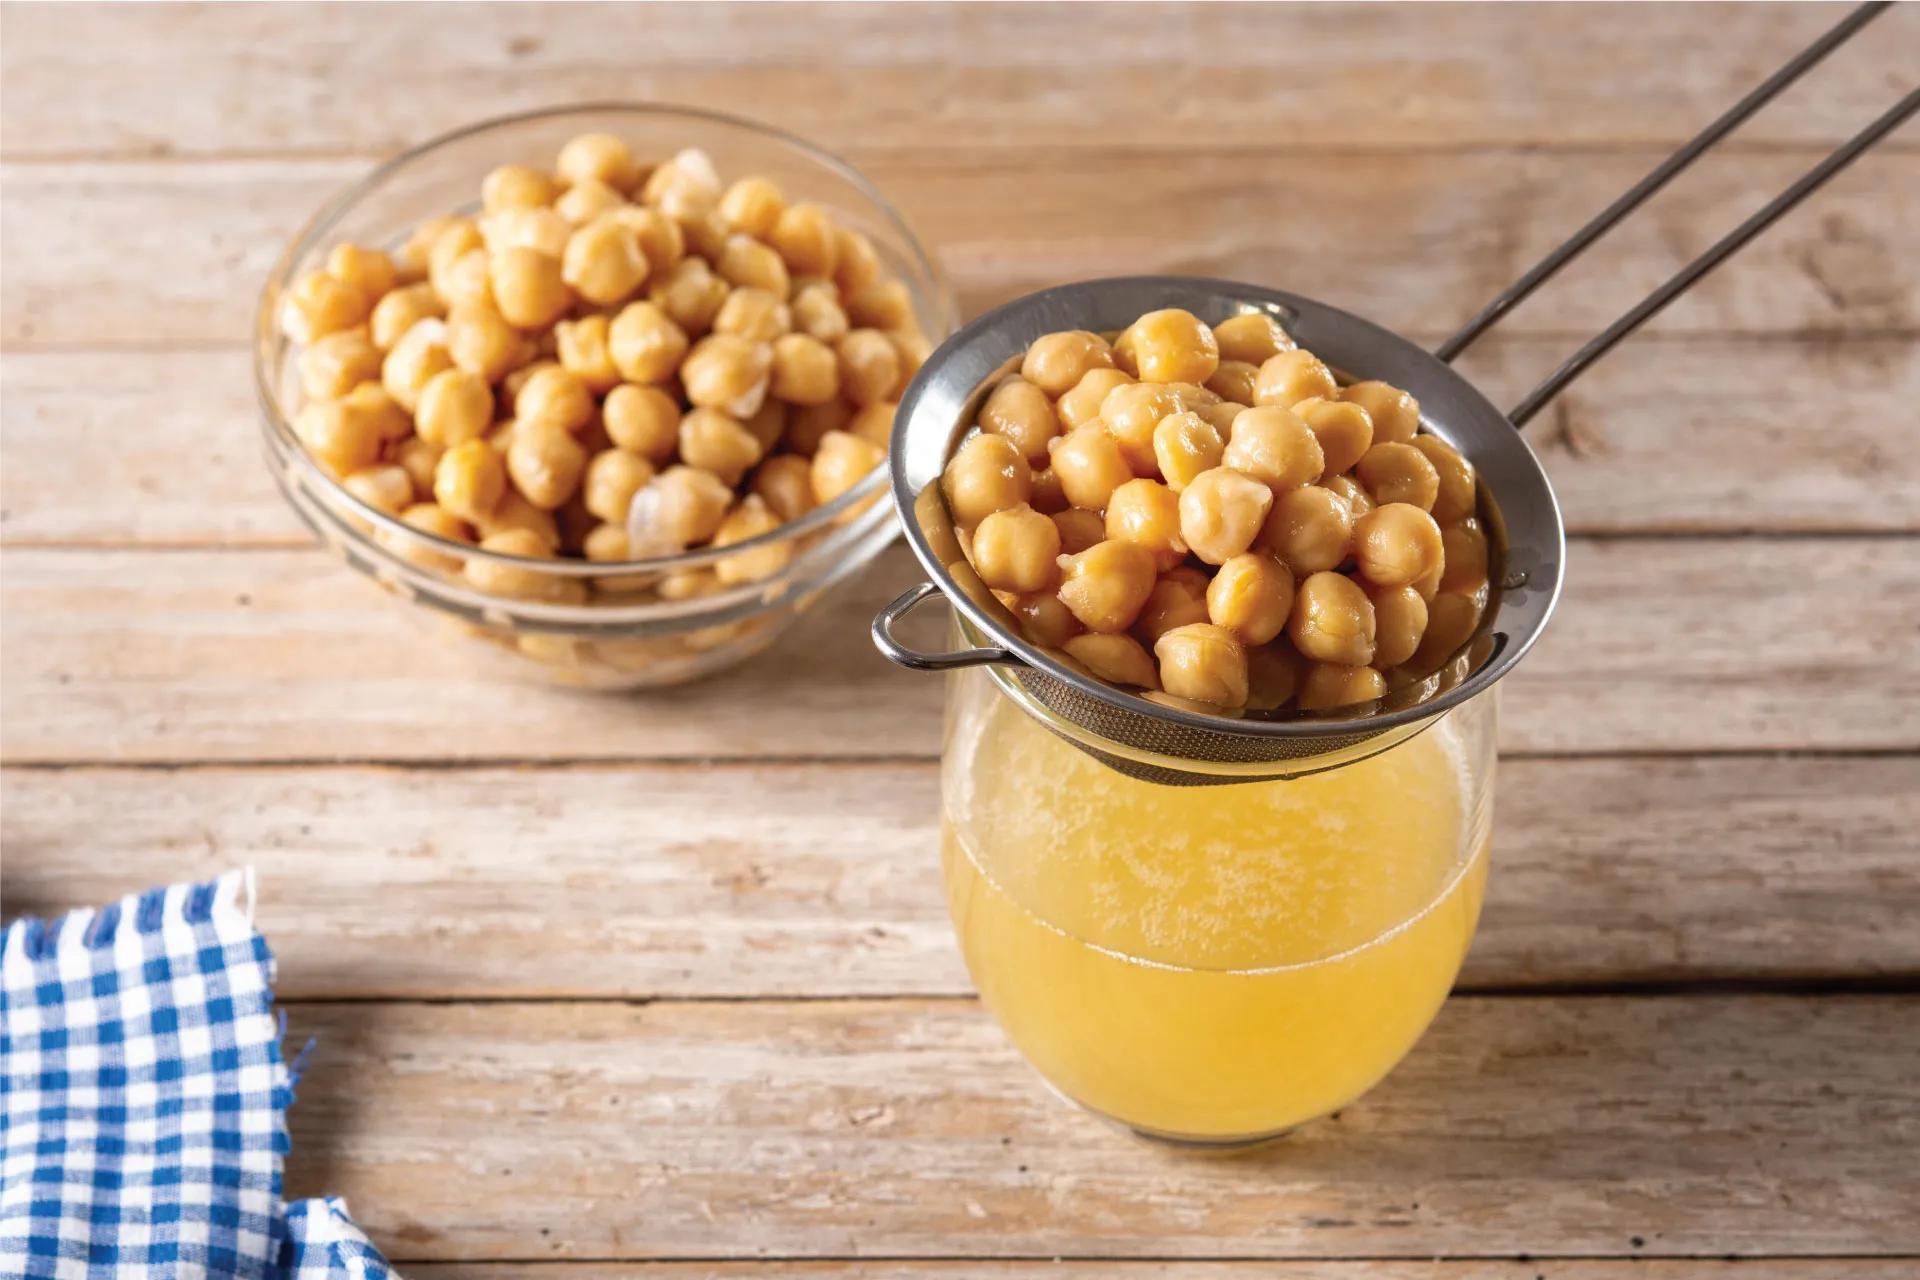 Chickpeas: Health Benefits and Nutritional Value